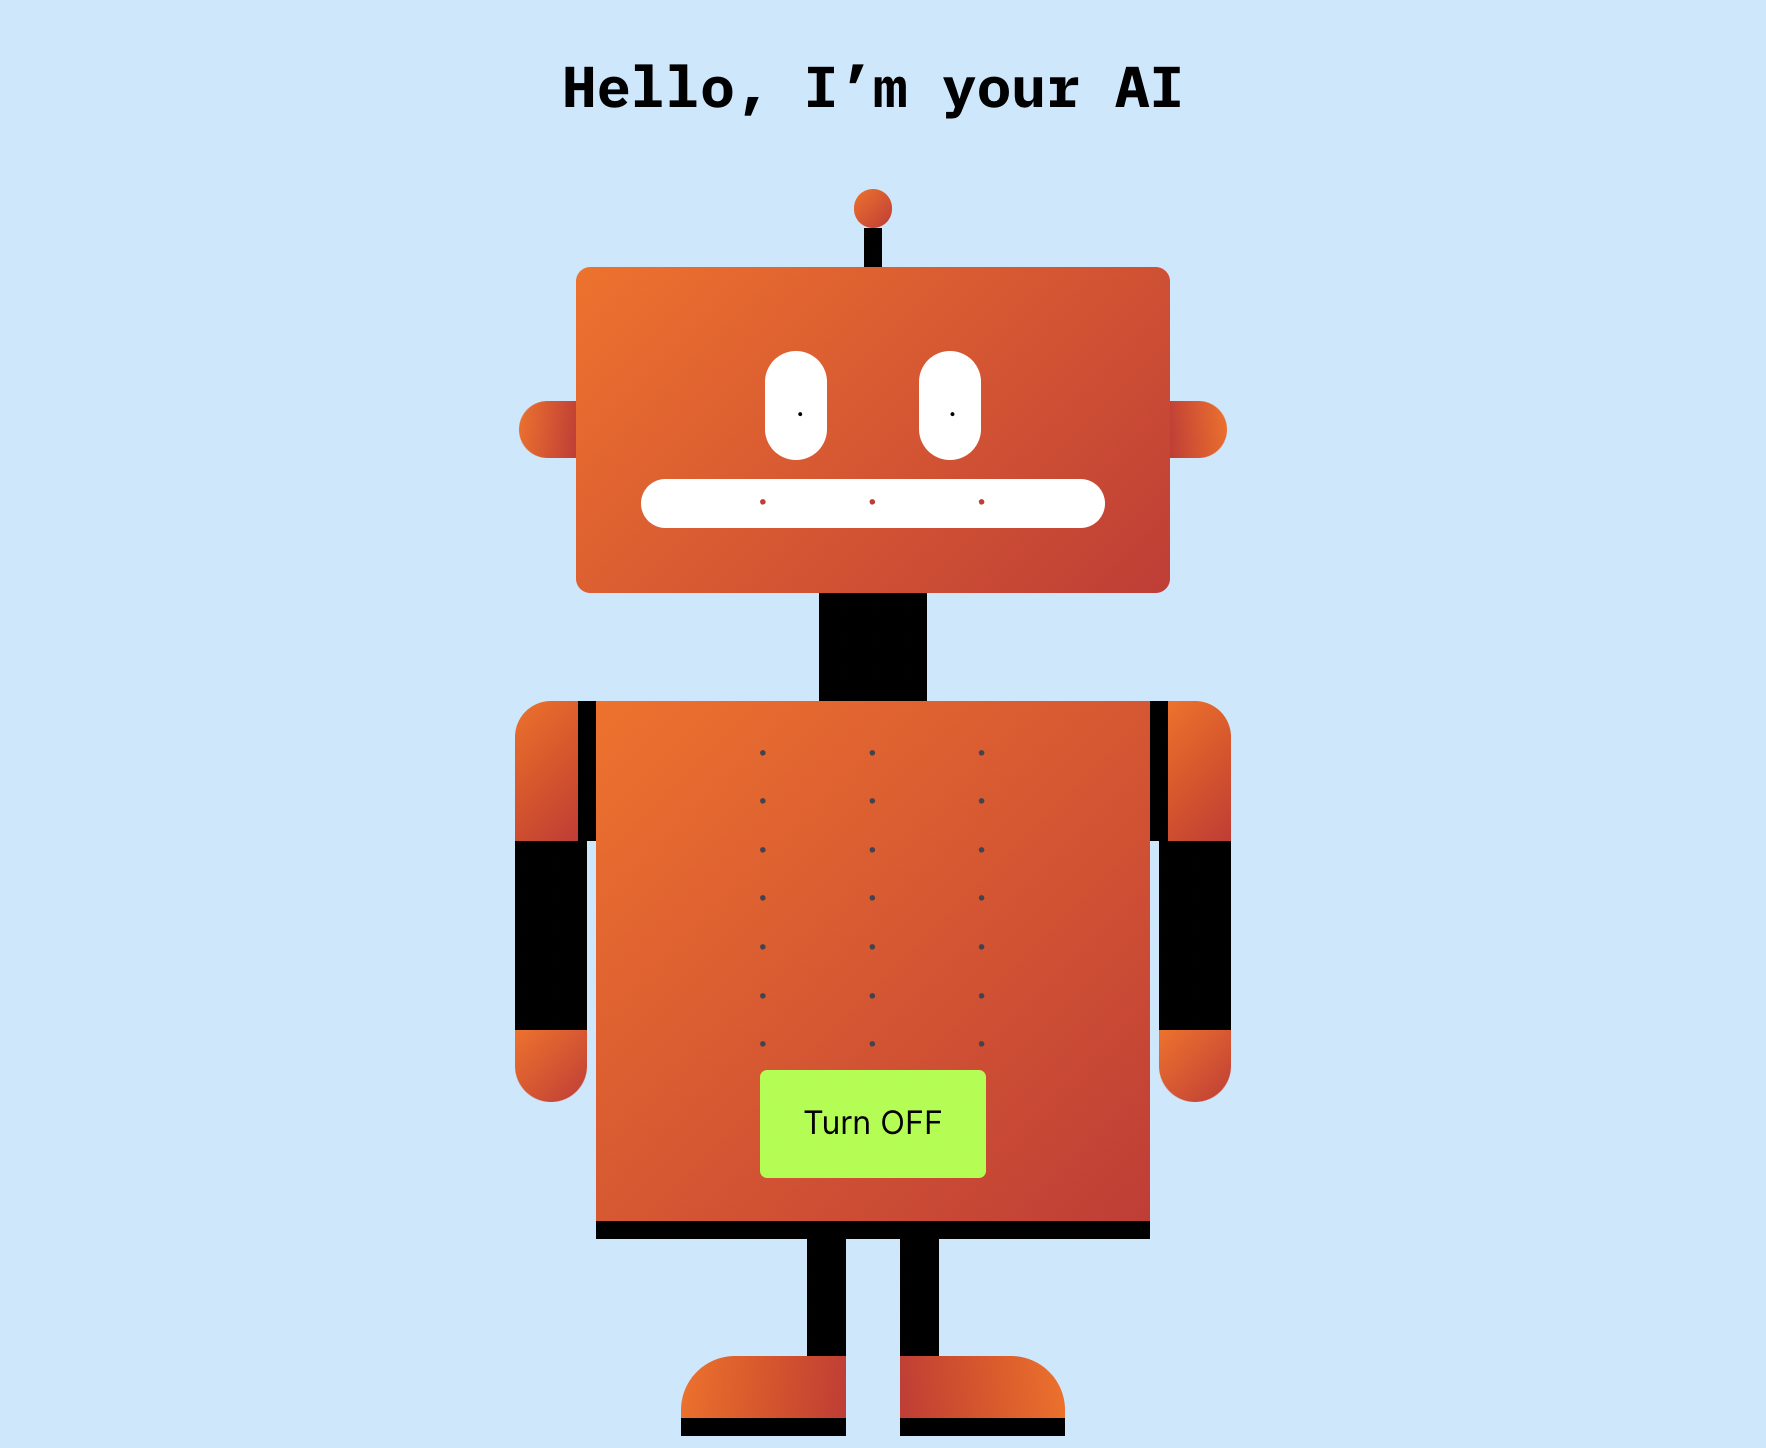 Orange robot on a blue background saying "Hello, I'm your AI" with a lime green Turn Off button